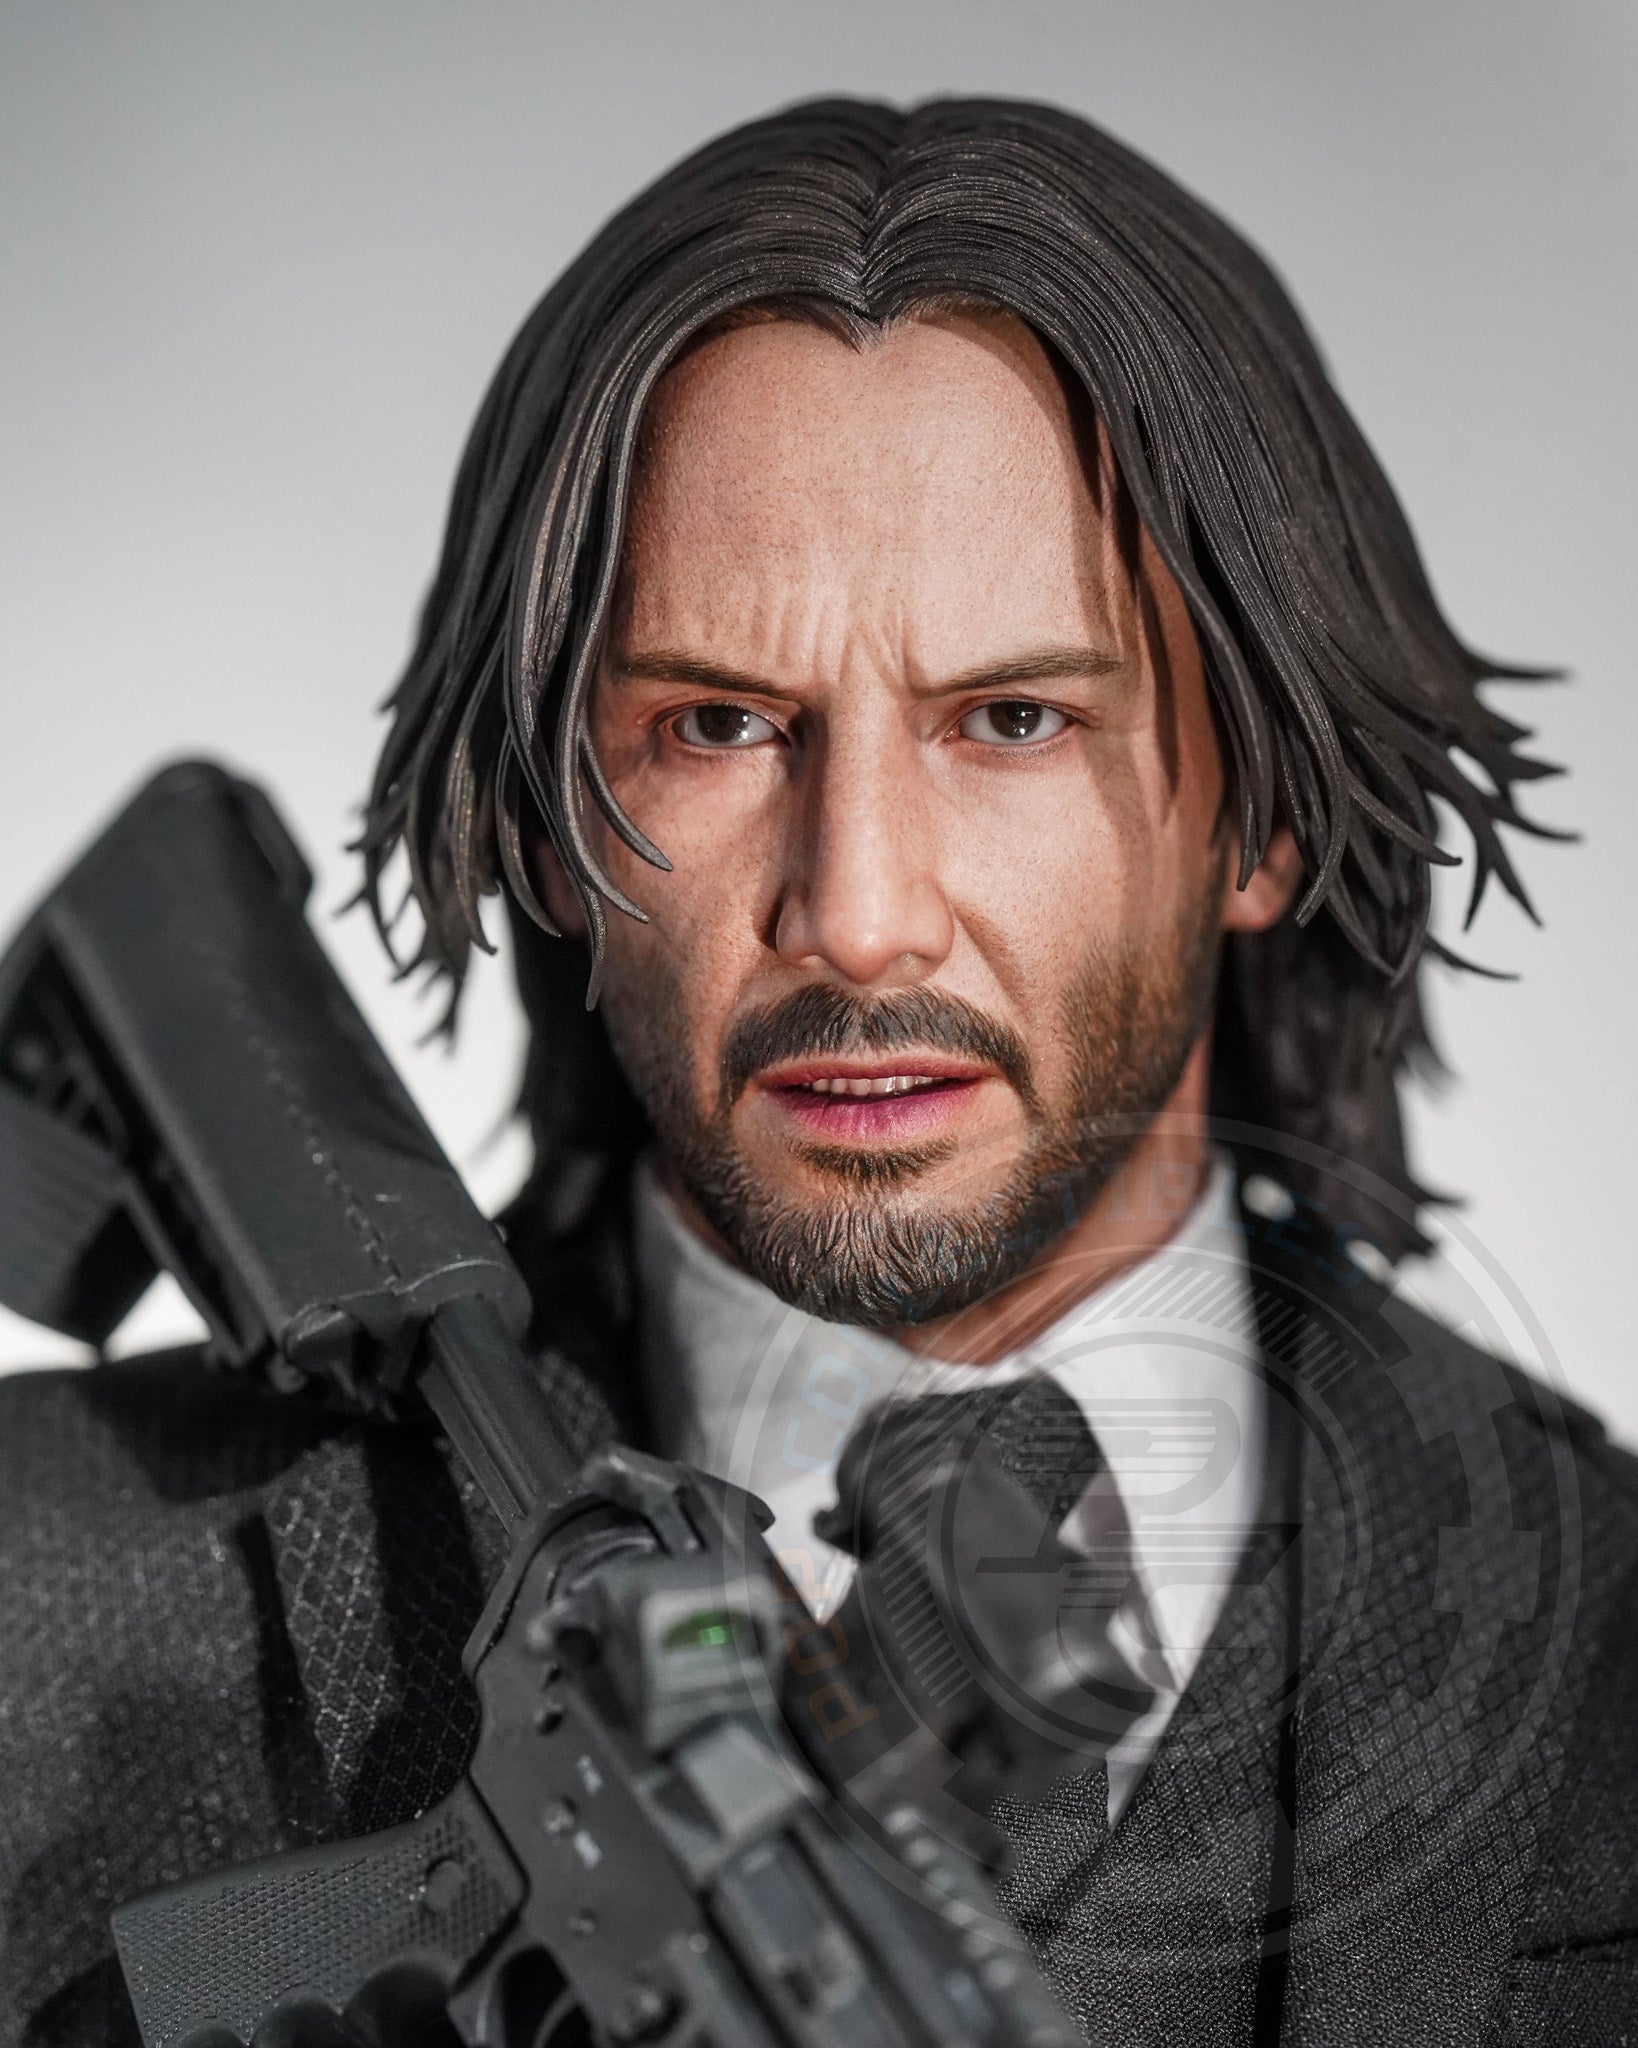 John Wick: Chapter 4' Consumer Products: Action Figures, Apparel